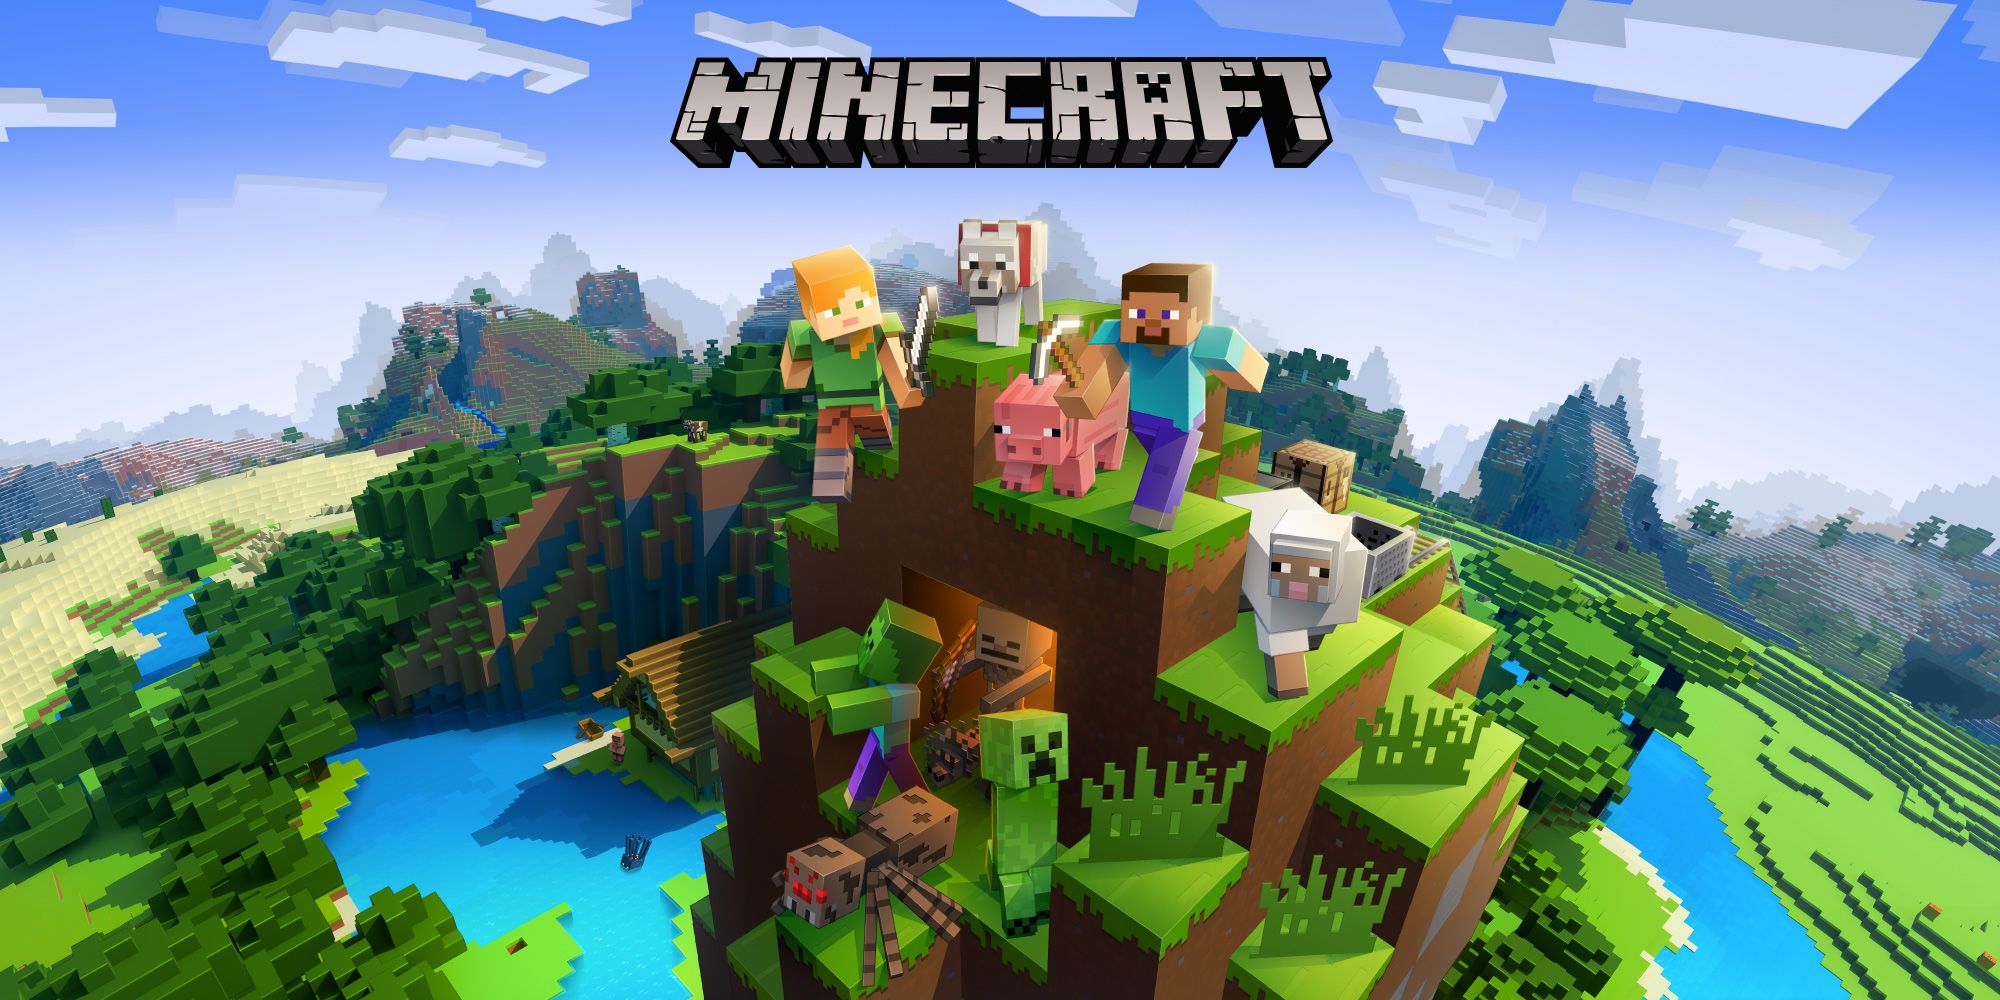 An image showcasing characters from Minecraft